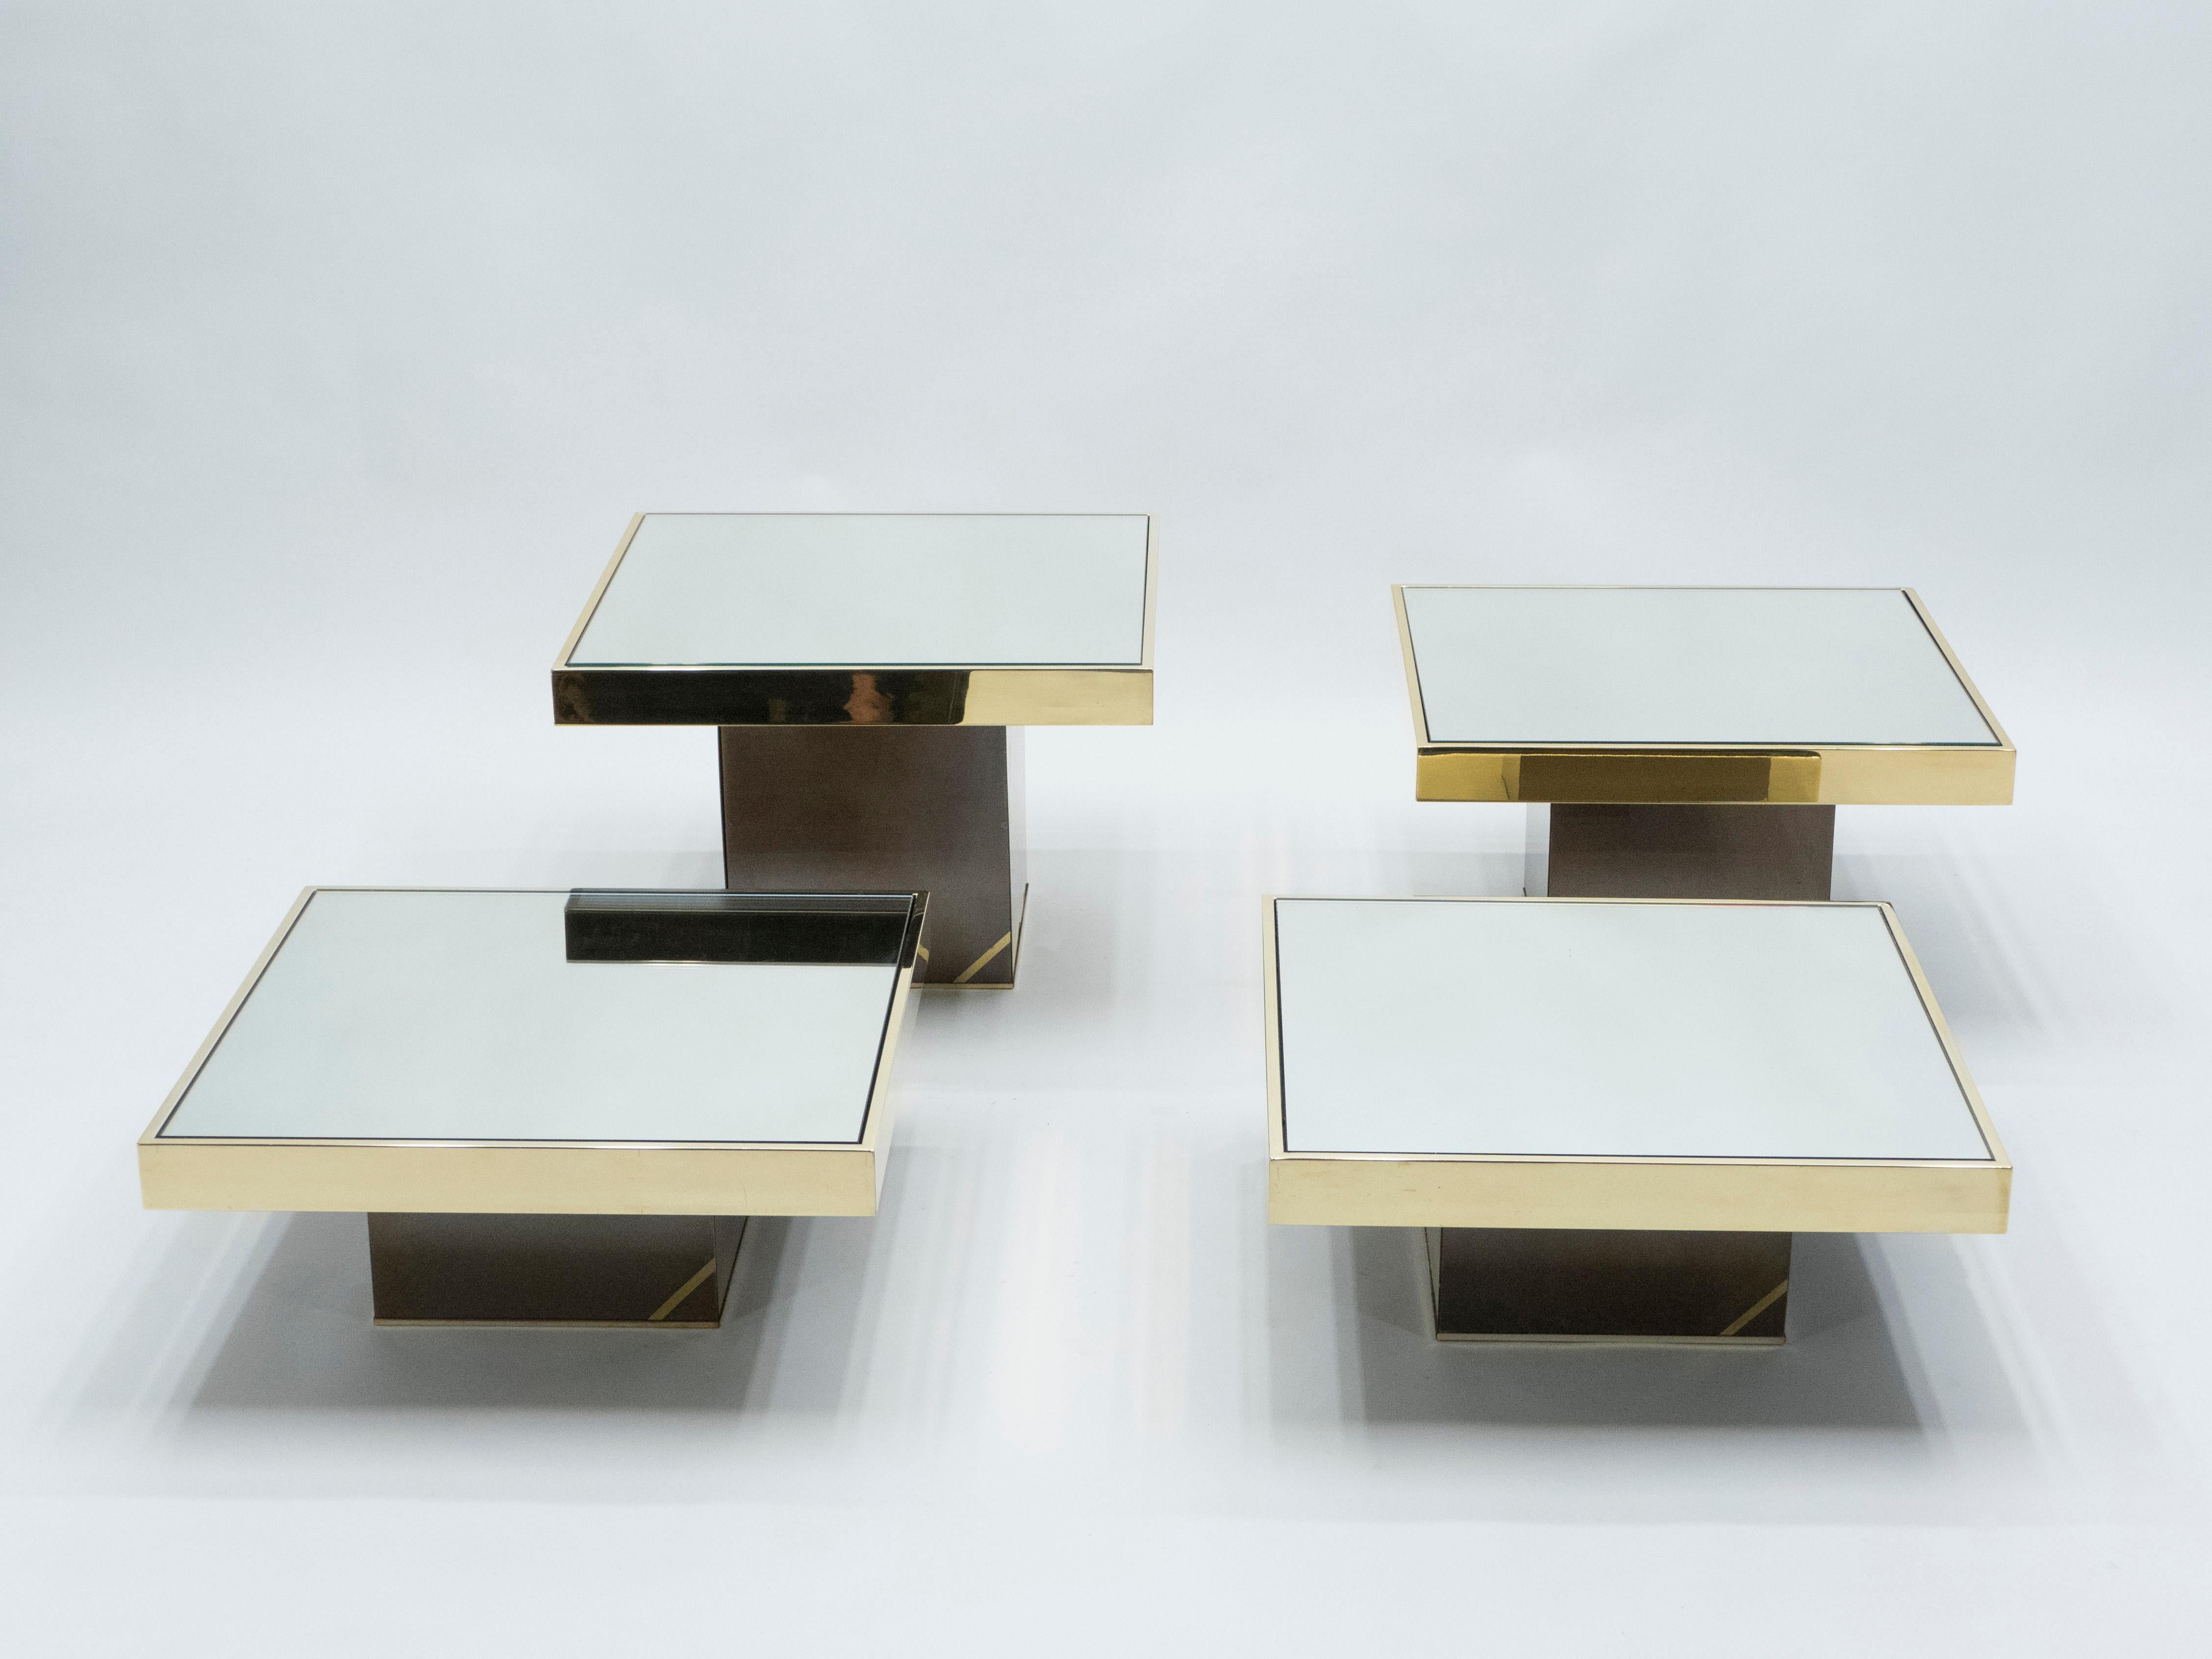 Celebrated luxury furniture designer Willy Rizzo designed this set of 4 coffee tables for Cidue Italy in the 1970s. Light reflecting qualities abound as the mirrored surfaces are wrapped in shiny brass. Chunky blocks of gunmetal with brass accent